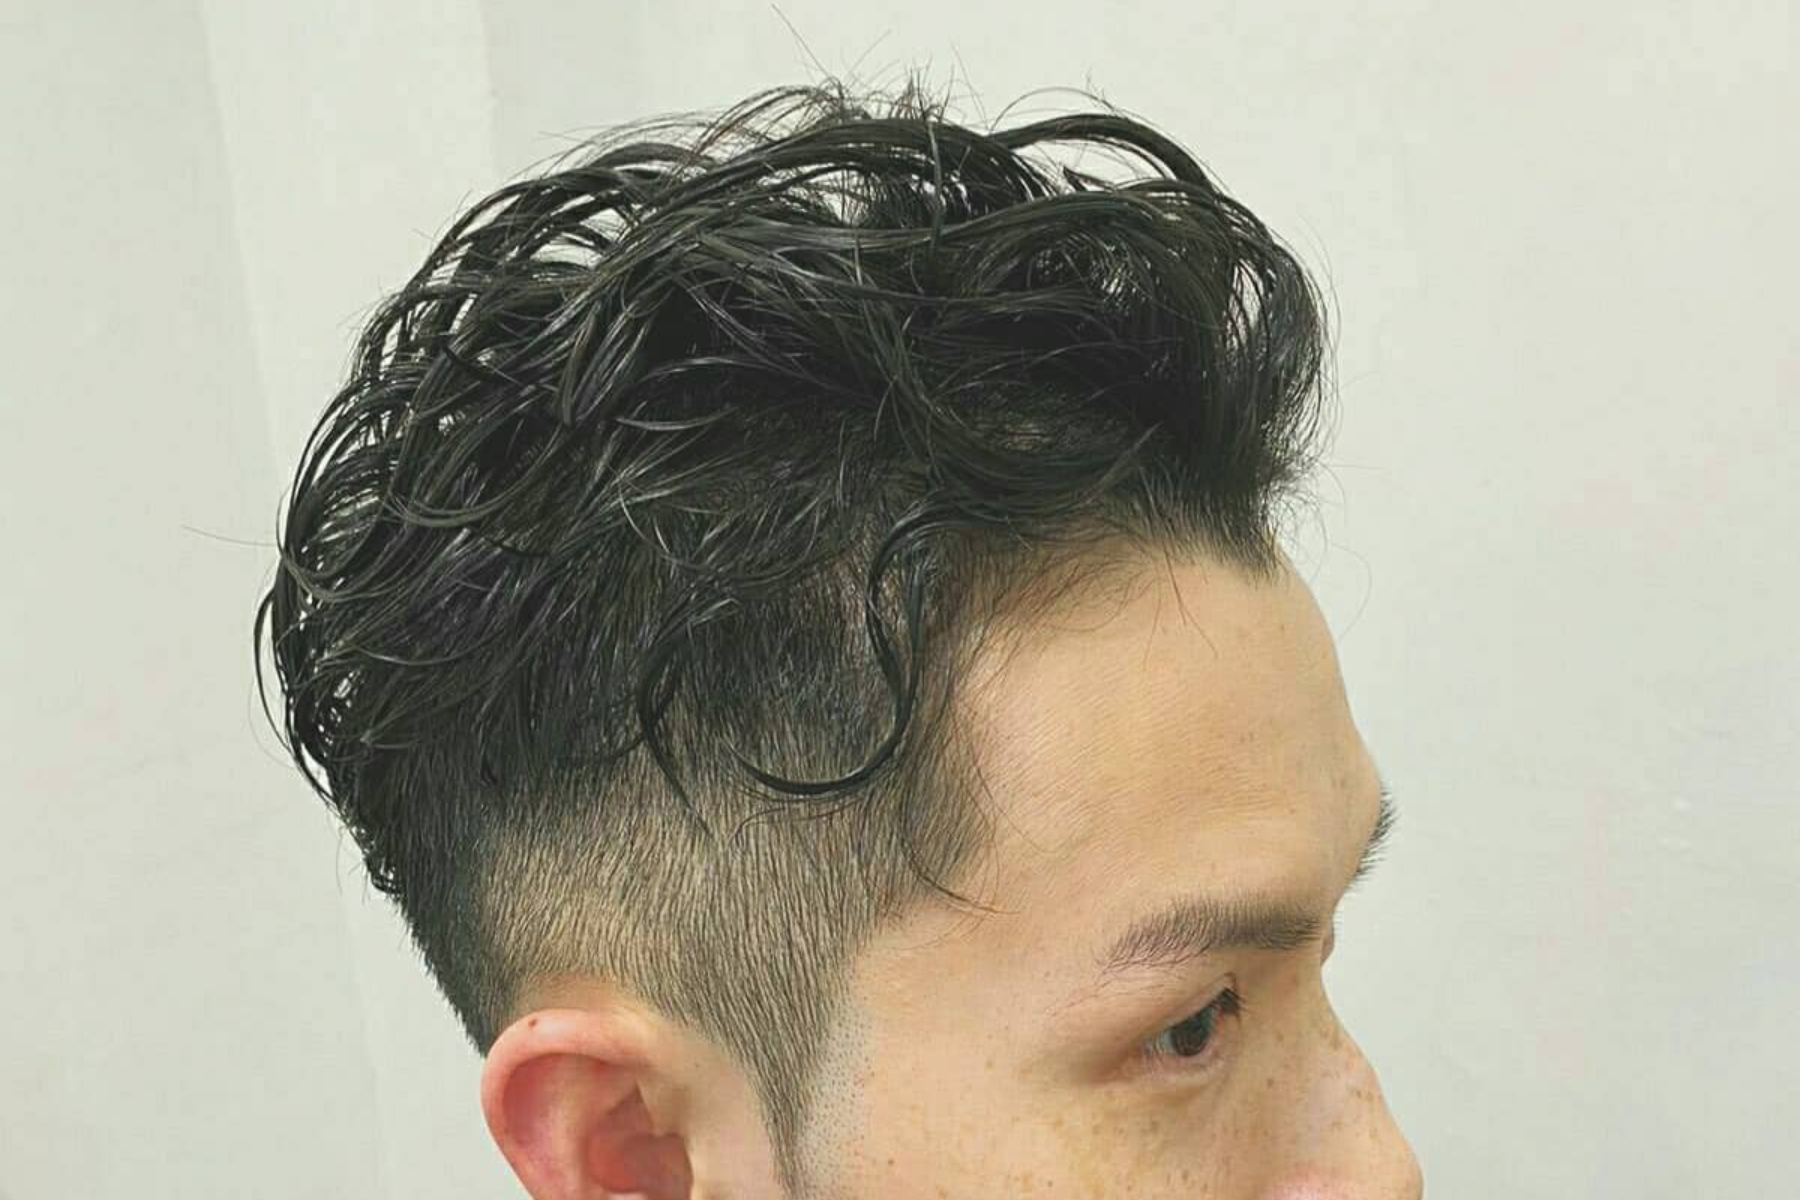 An Asian man with a brushed back hairstyle